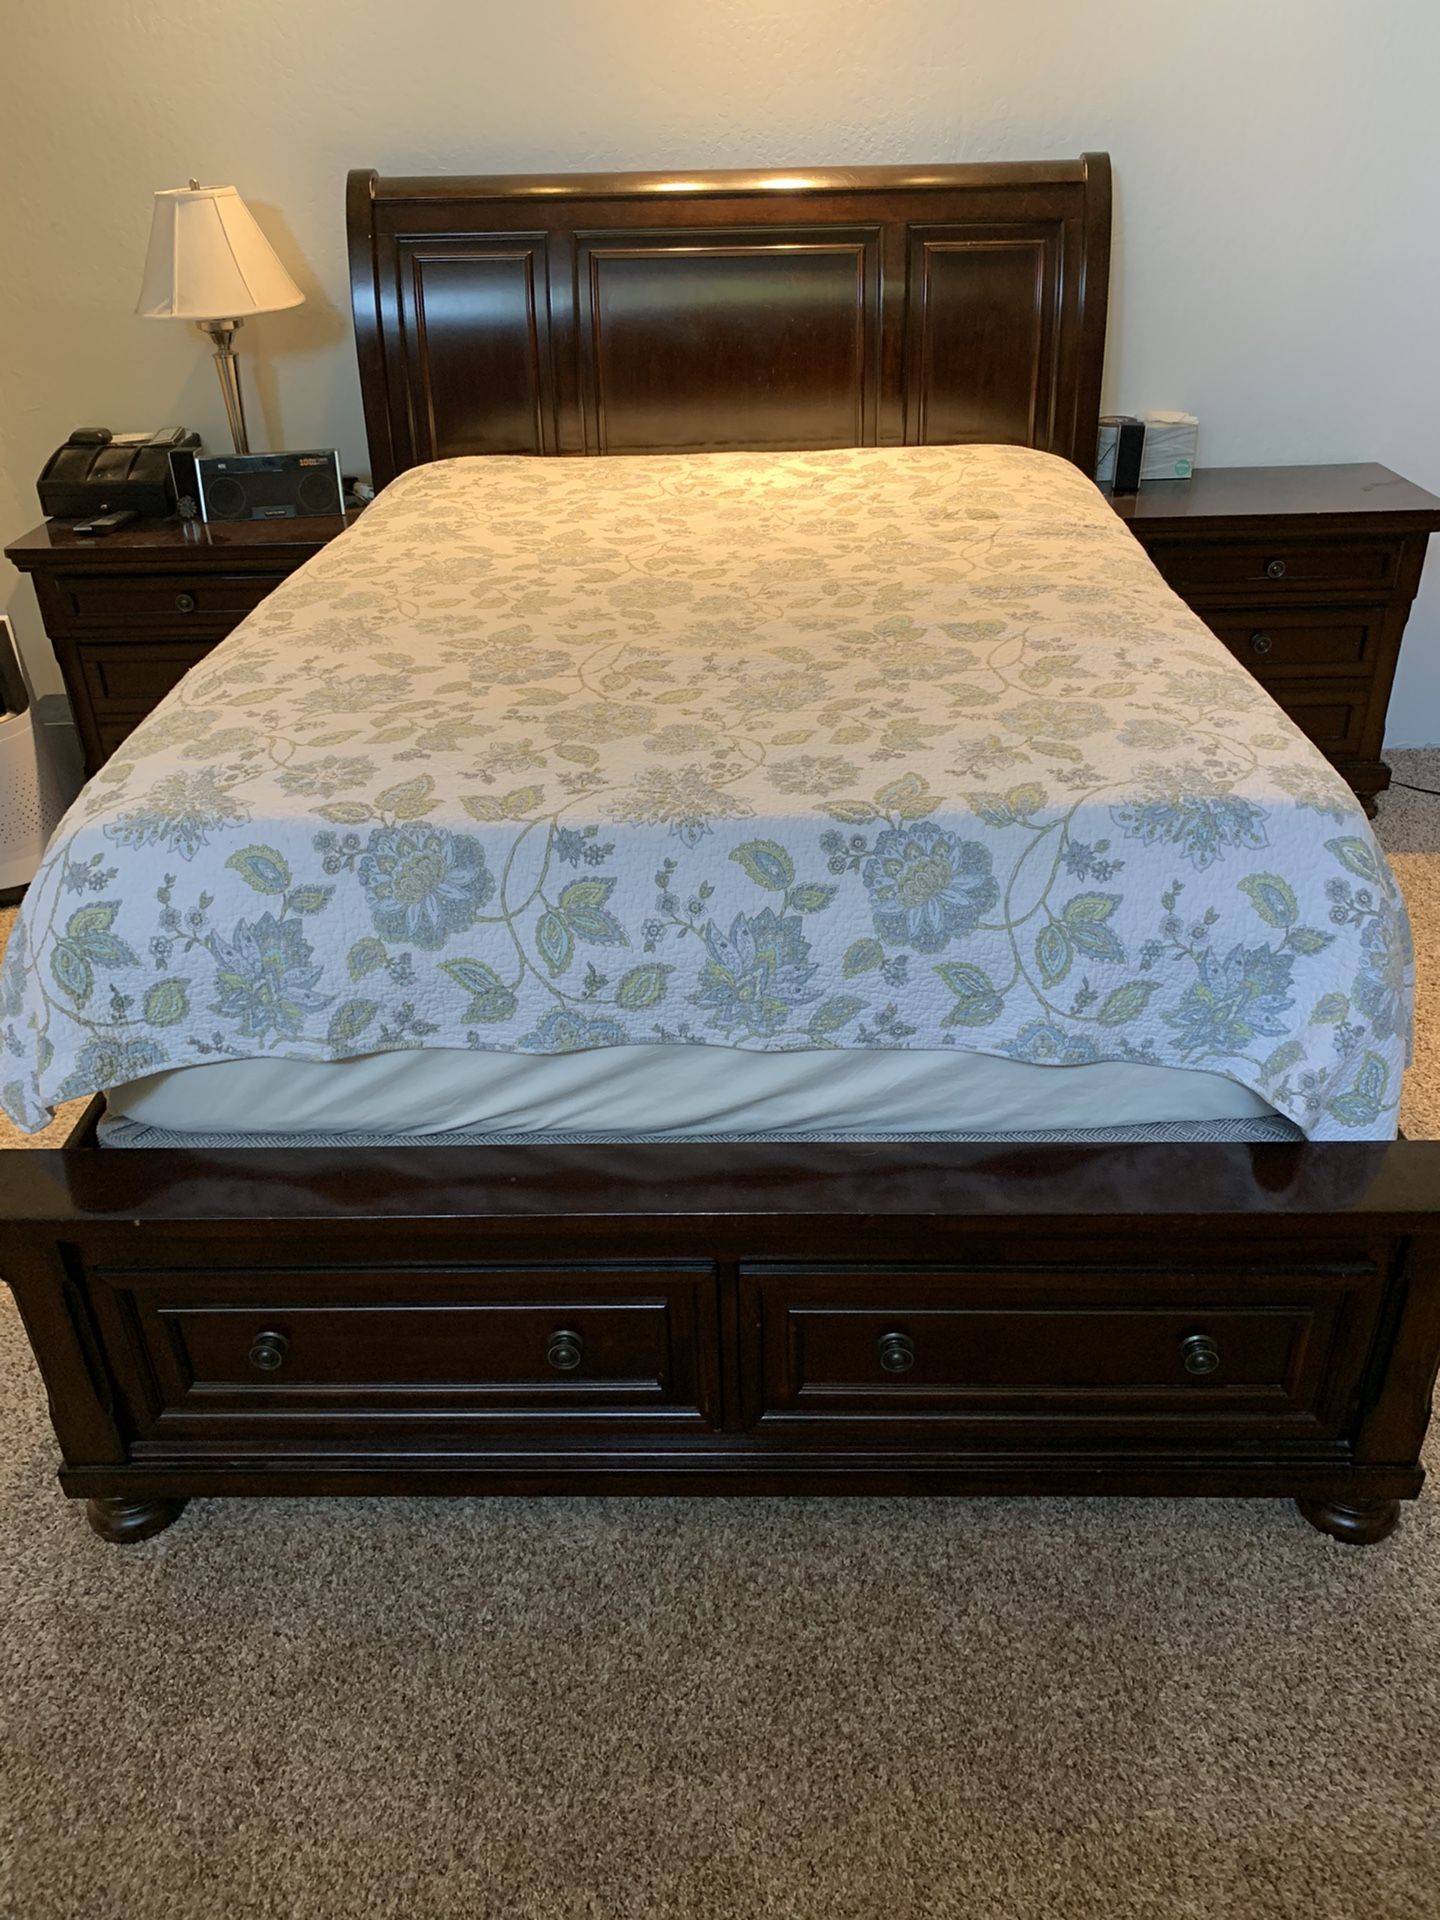 Six piece Queen Bedroom Set - Purchased from Ashley Furniture